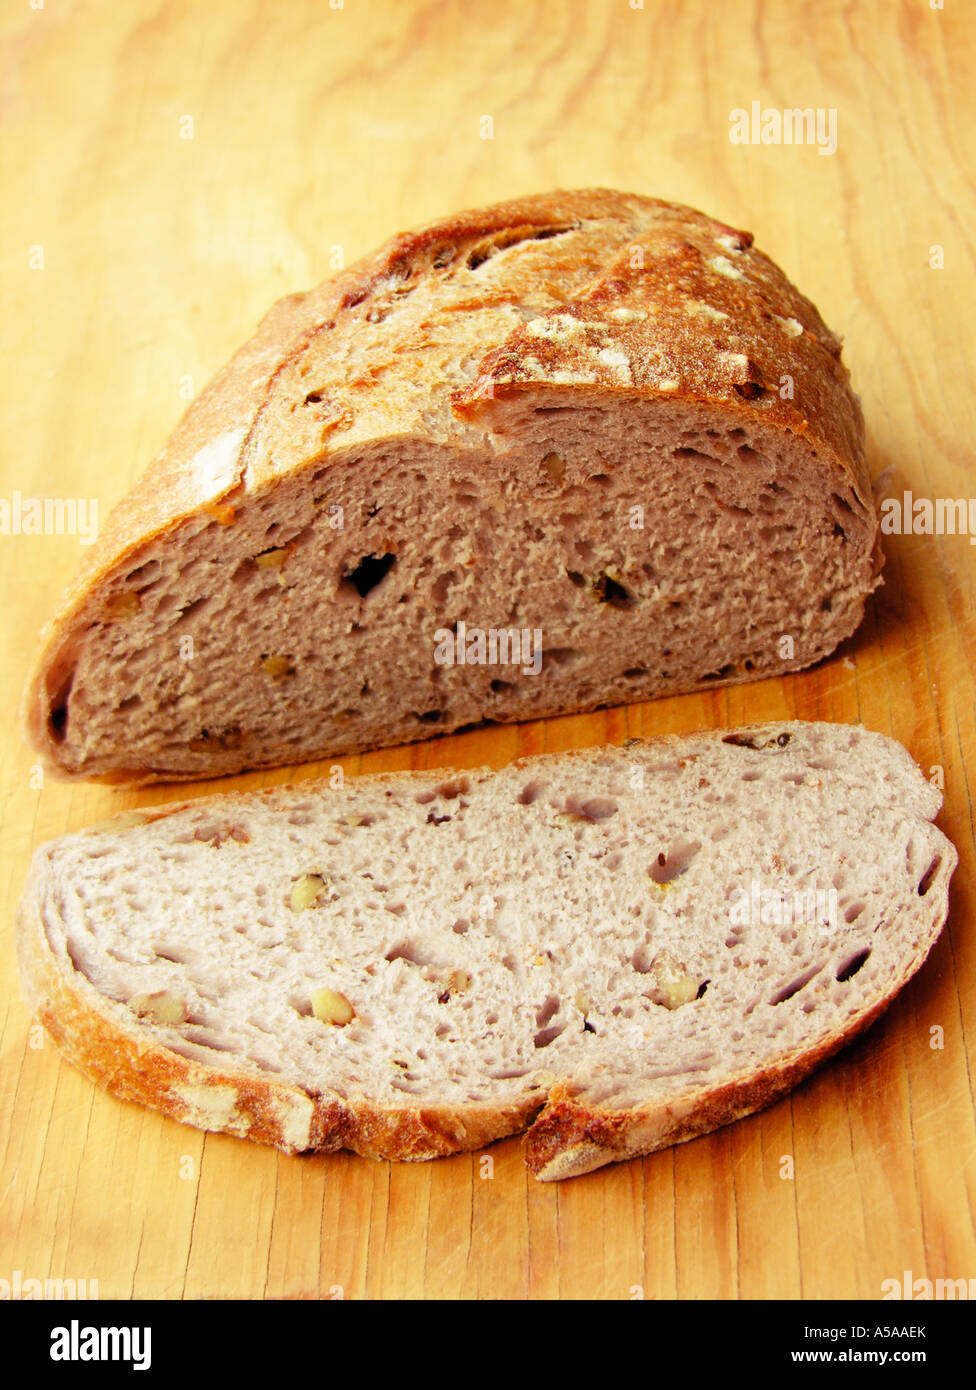 Wholemeal bread with walnuts on wooden board Stock Photo